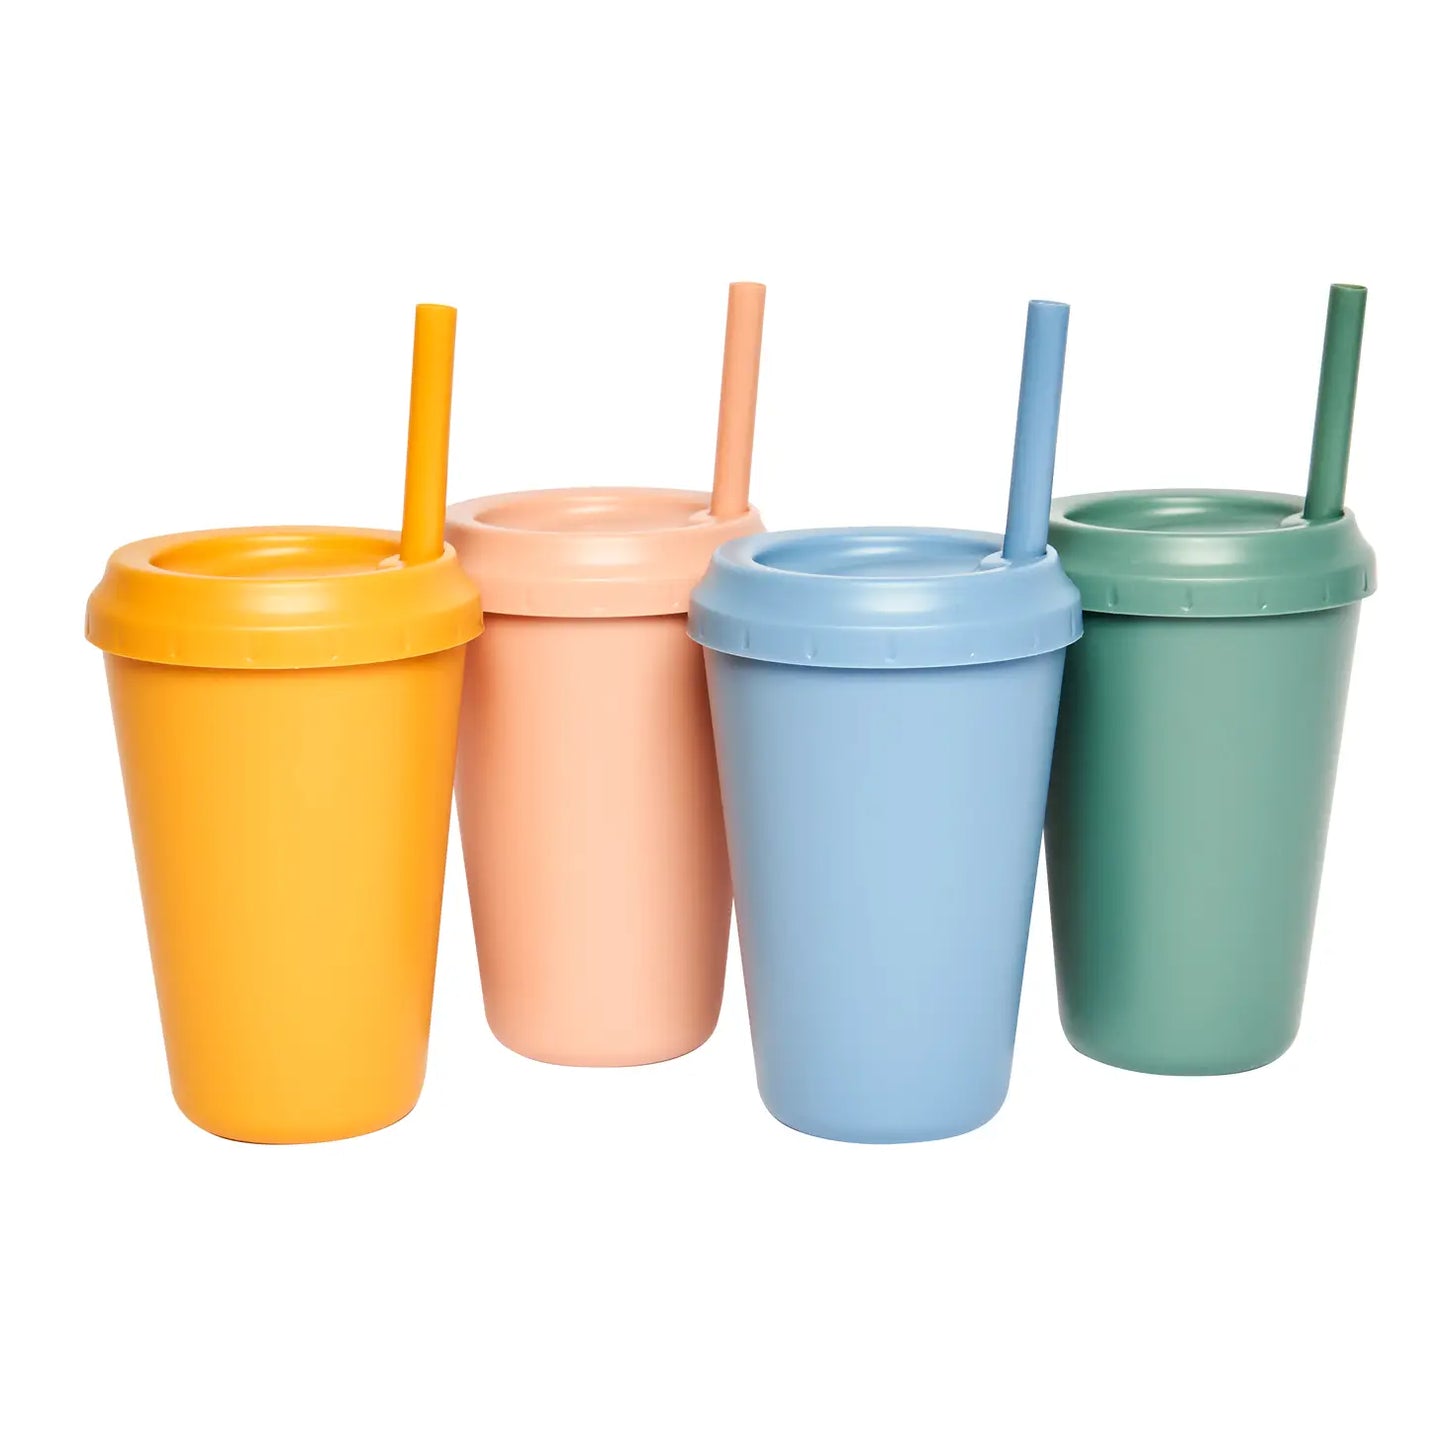 Eco-friendly and colourful set for convenient and fun on-the-go hydration.